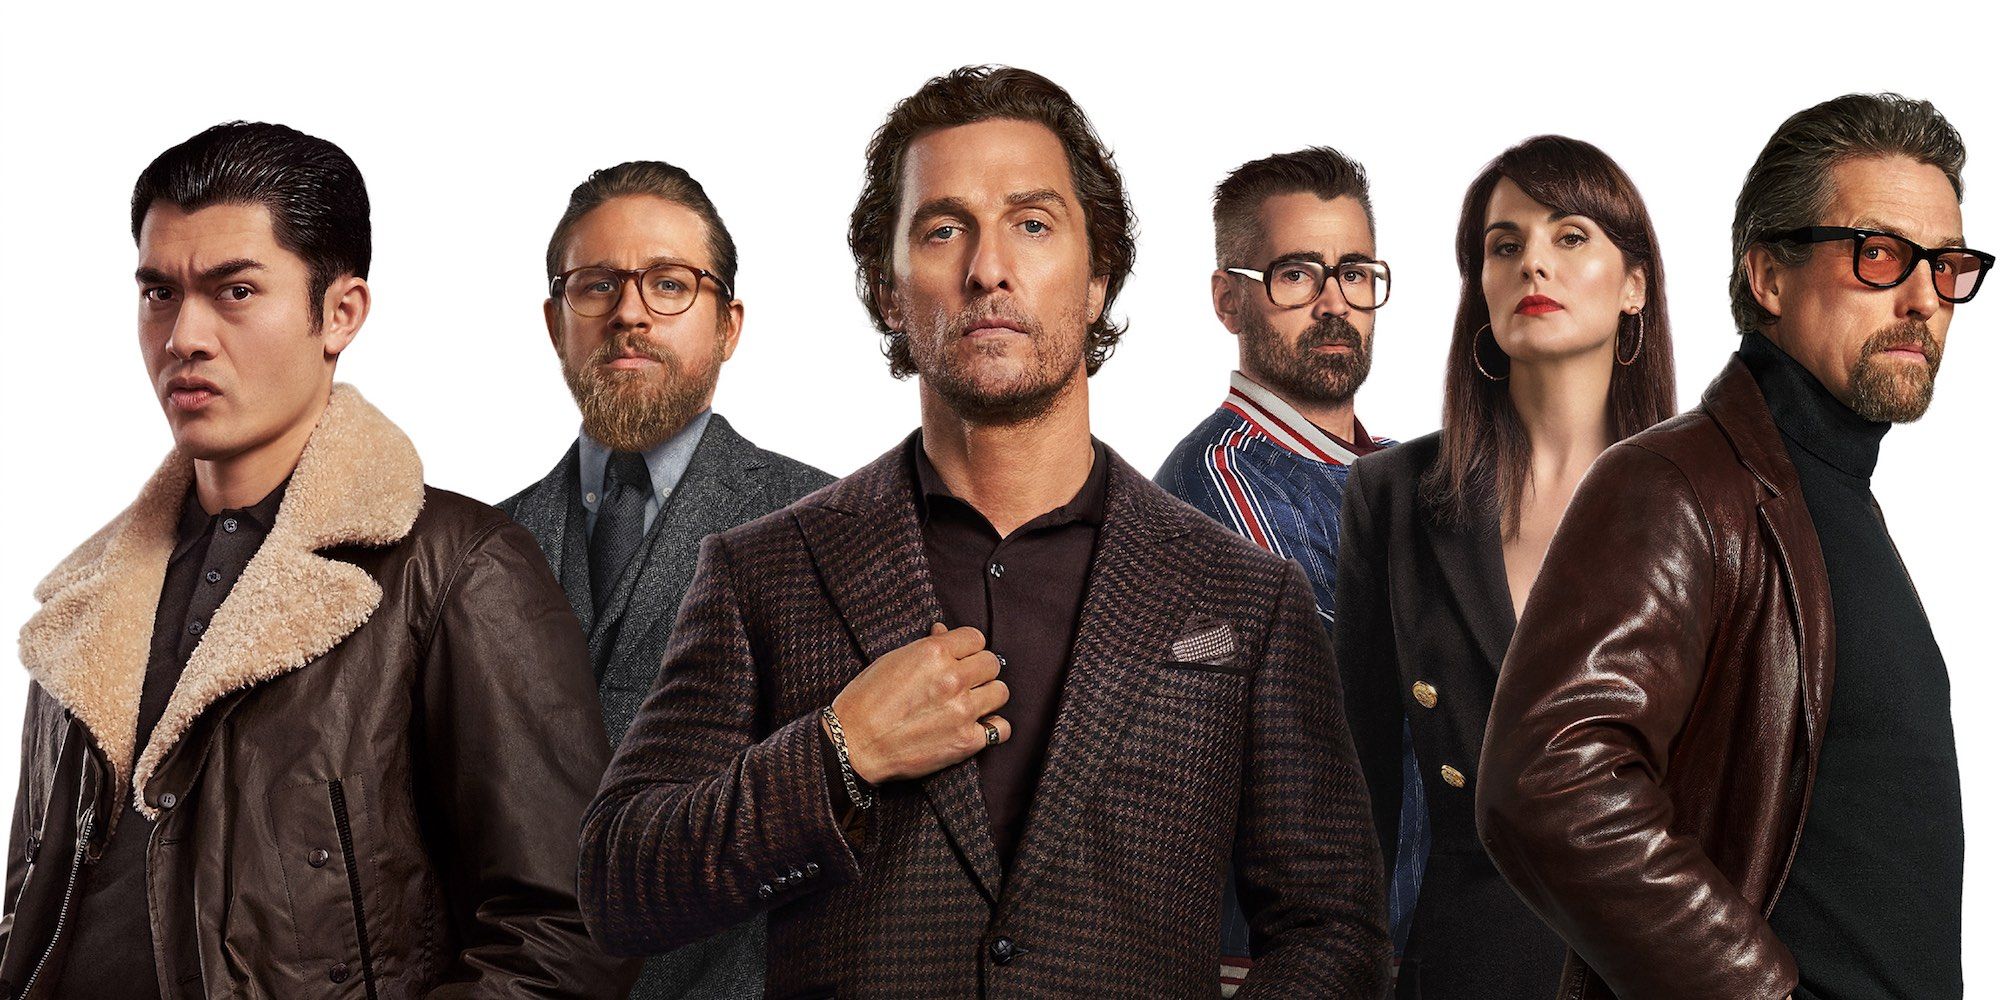 The cast of The Gentlemen posing in a poster, including Matthew McConaughey, Colin Farrell, Hugh Grant, and Henry Golding